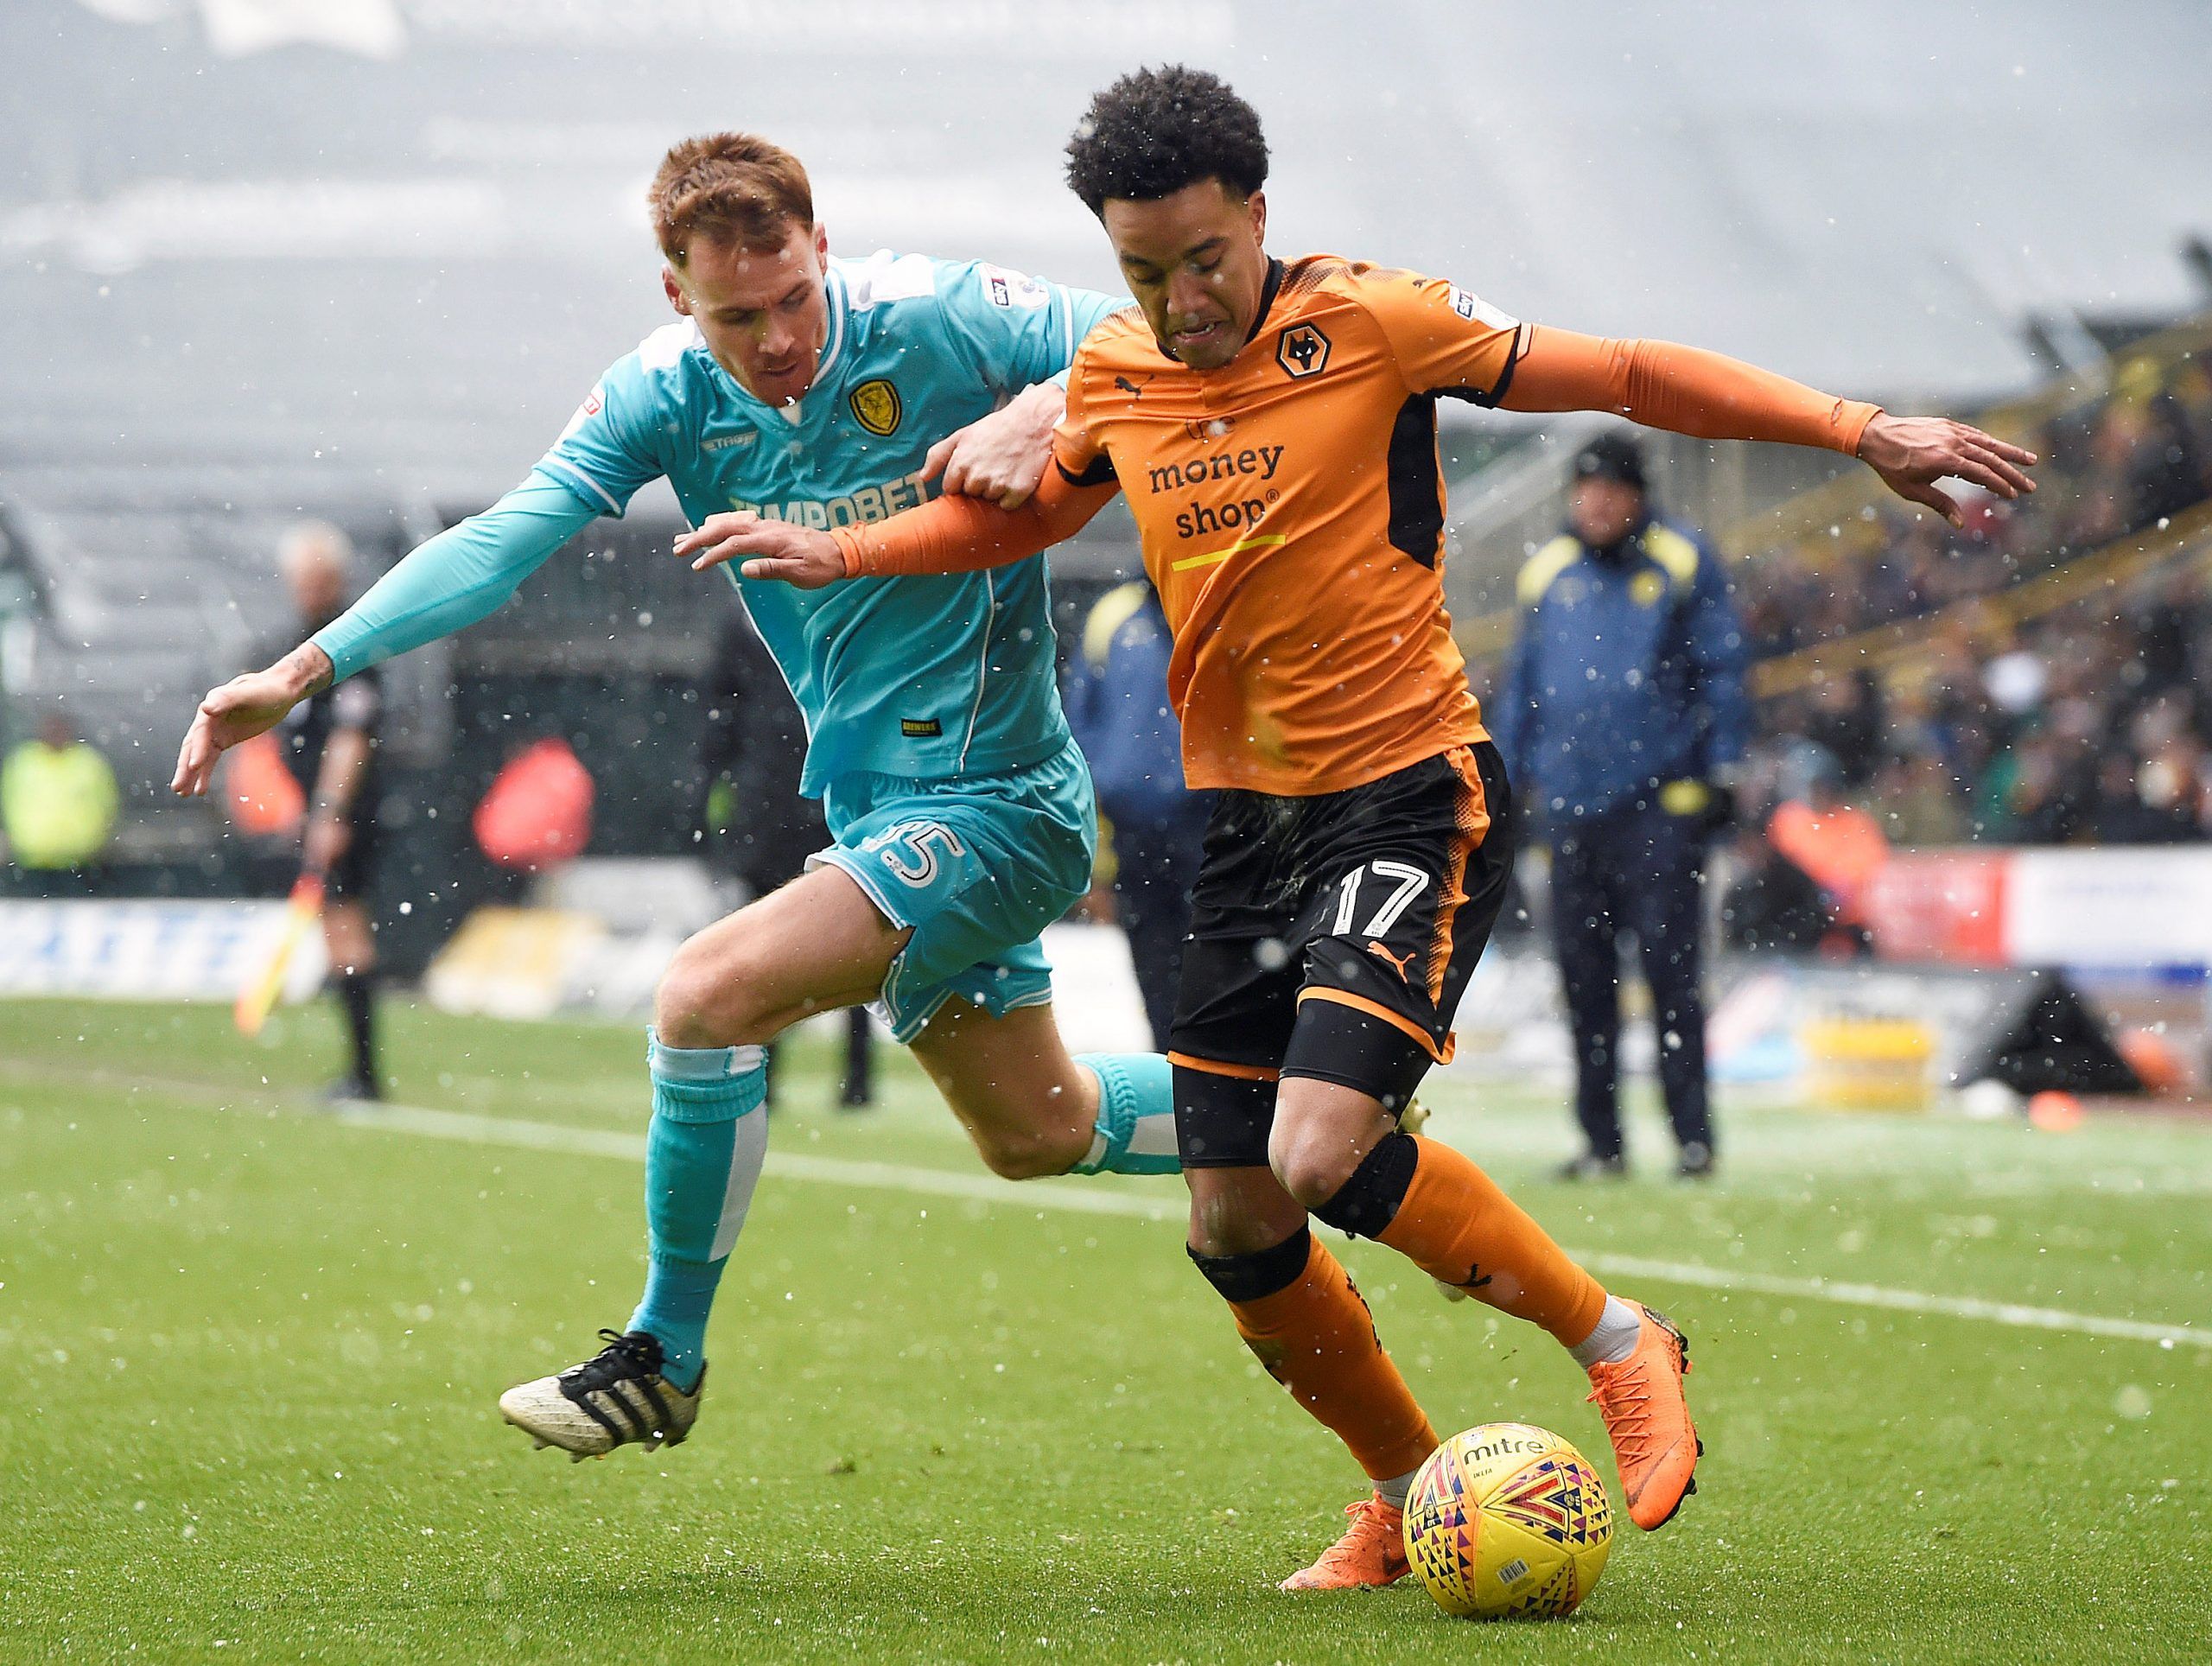 Soccer Football - Championship - Wolverhampton Wanderers vs Burton Albion - Molineux Stadium, Wolverhampton, Britain - March 17, 2018  Wolves' Helder Costa in action with Burton's Tom Naylor     Action Images/Alan Walter  EDITORIAL USE ONLY. No use with unauthorized audio, video, data, fixture lists, club/league logos or 